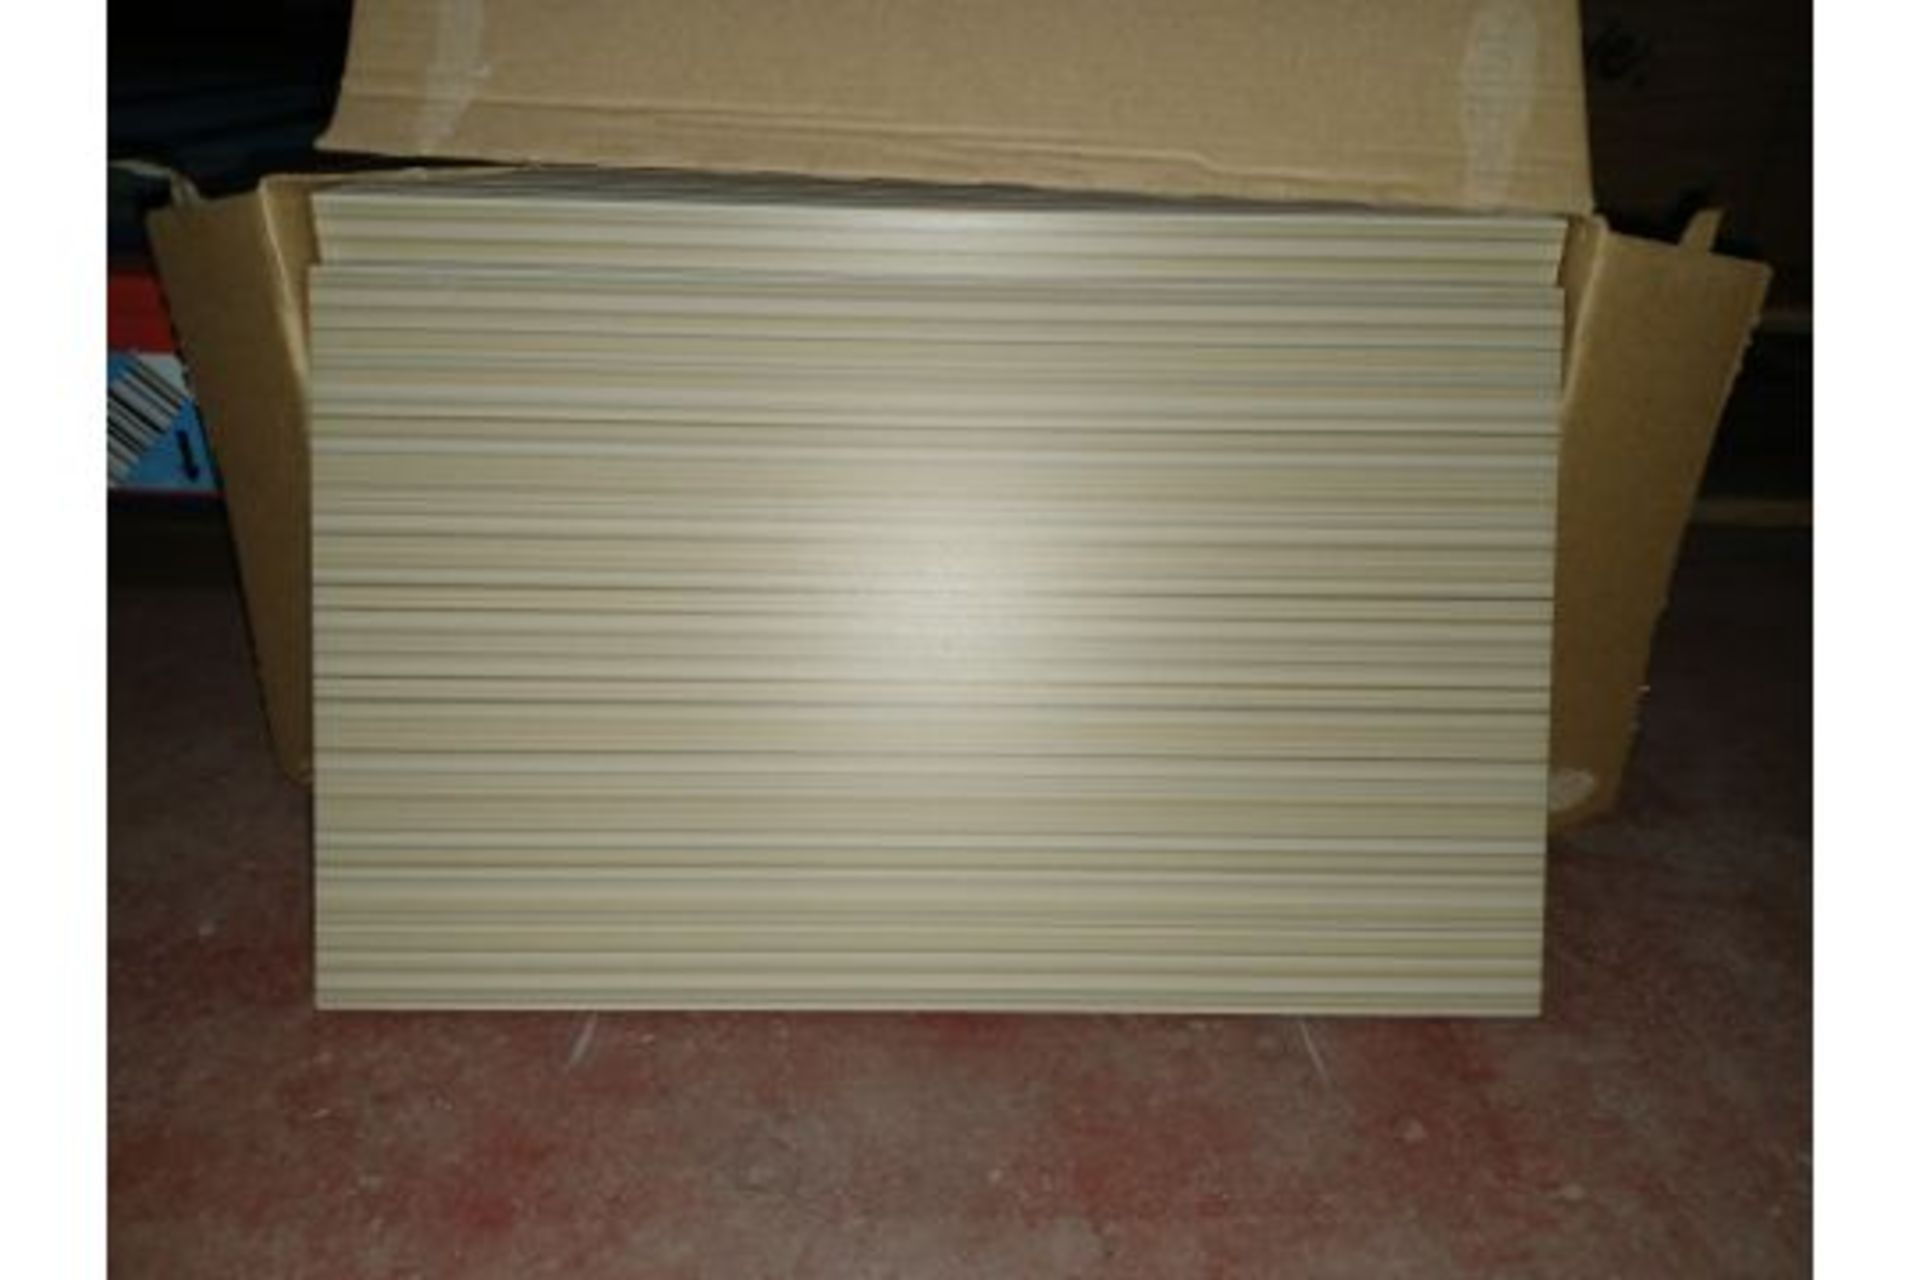 10 x PACKS OF PORCELANOSA PARK LINEA COLOR THREADS WALL TILES. SIZE: 200x316mm. Each box contains - Image 2 of 2